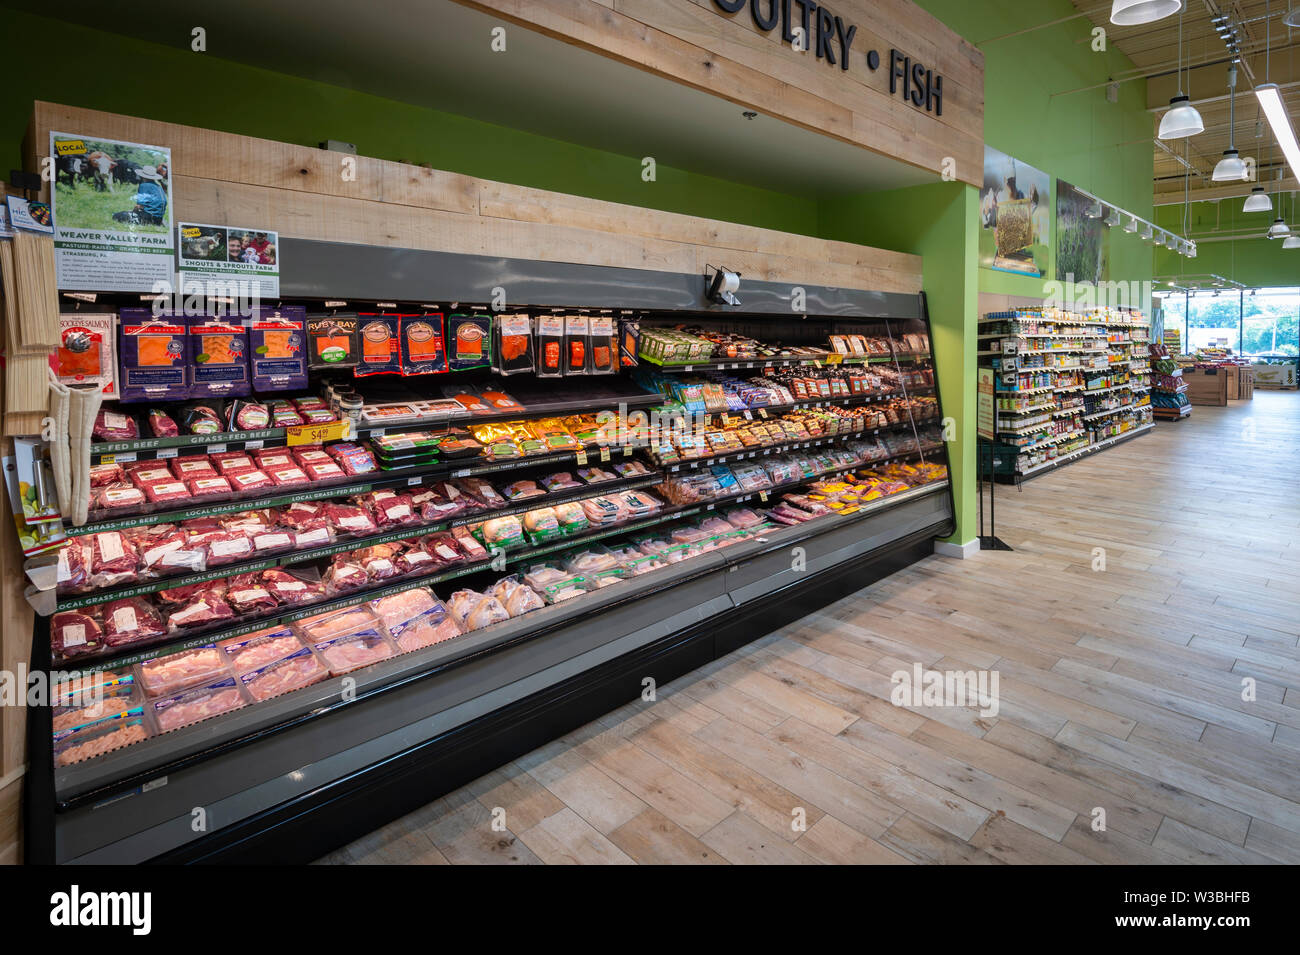 Meat Section Of American Food Grocery Store Stock Photo